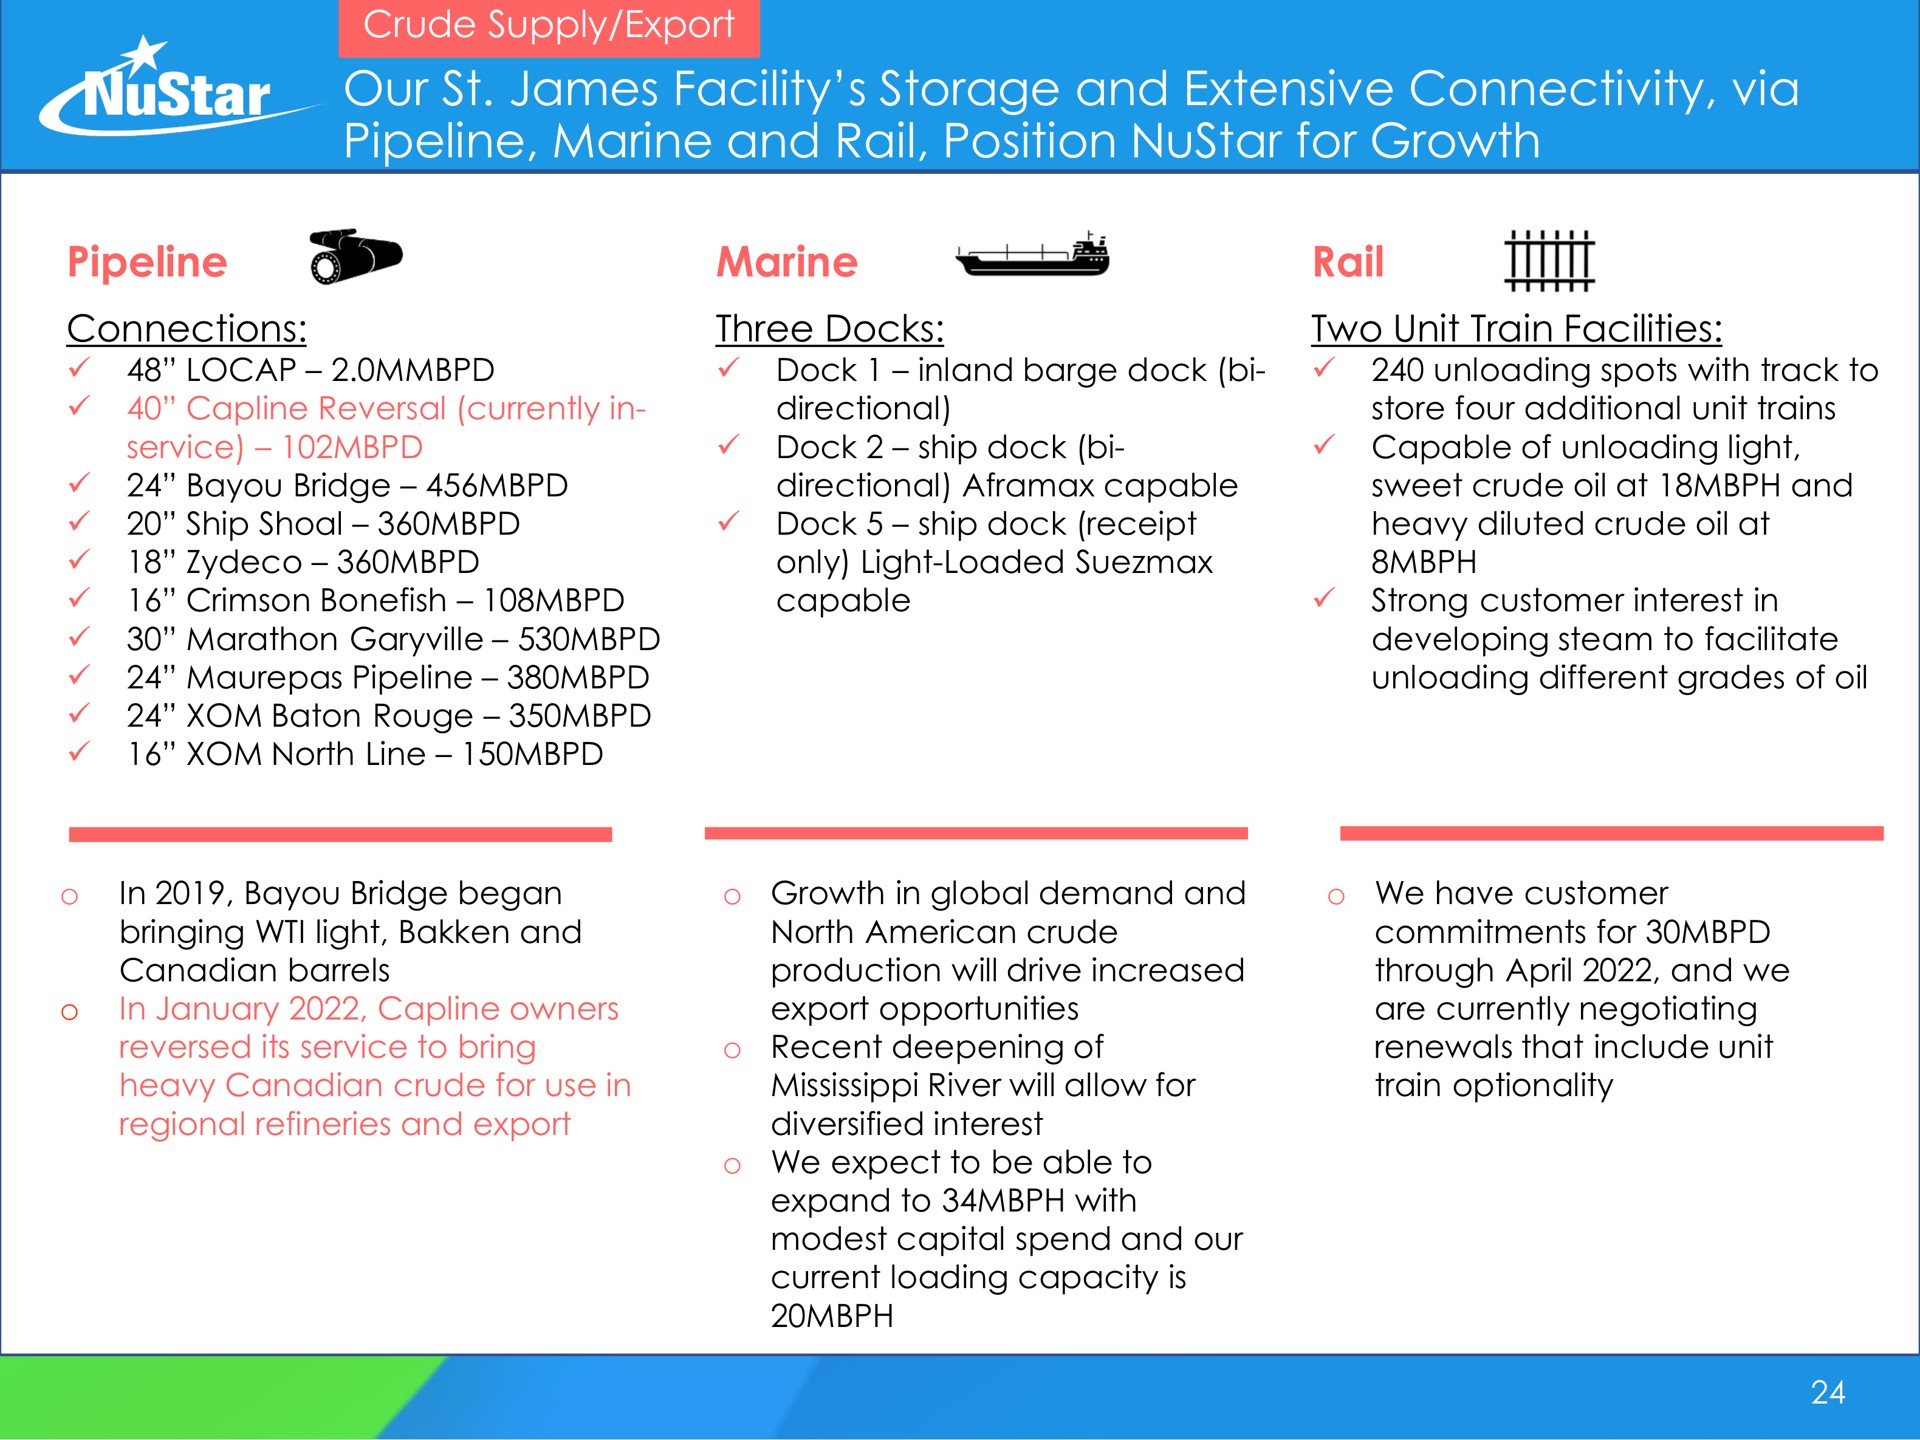 our james facility storage and extensive connectivity via pipeline marine and rail position for growth | NuStar Energy